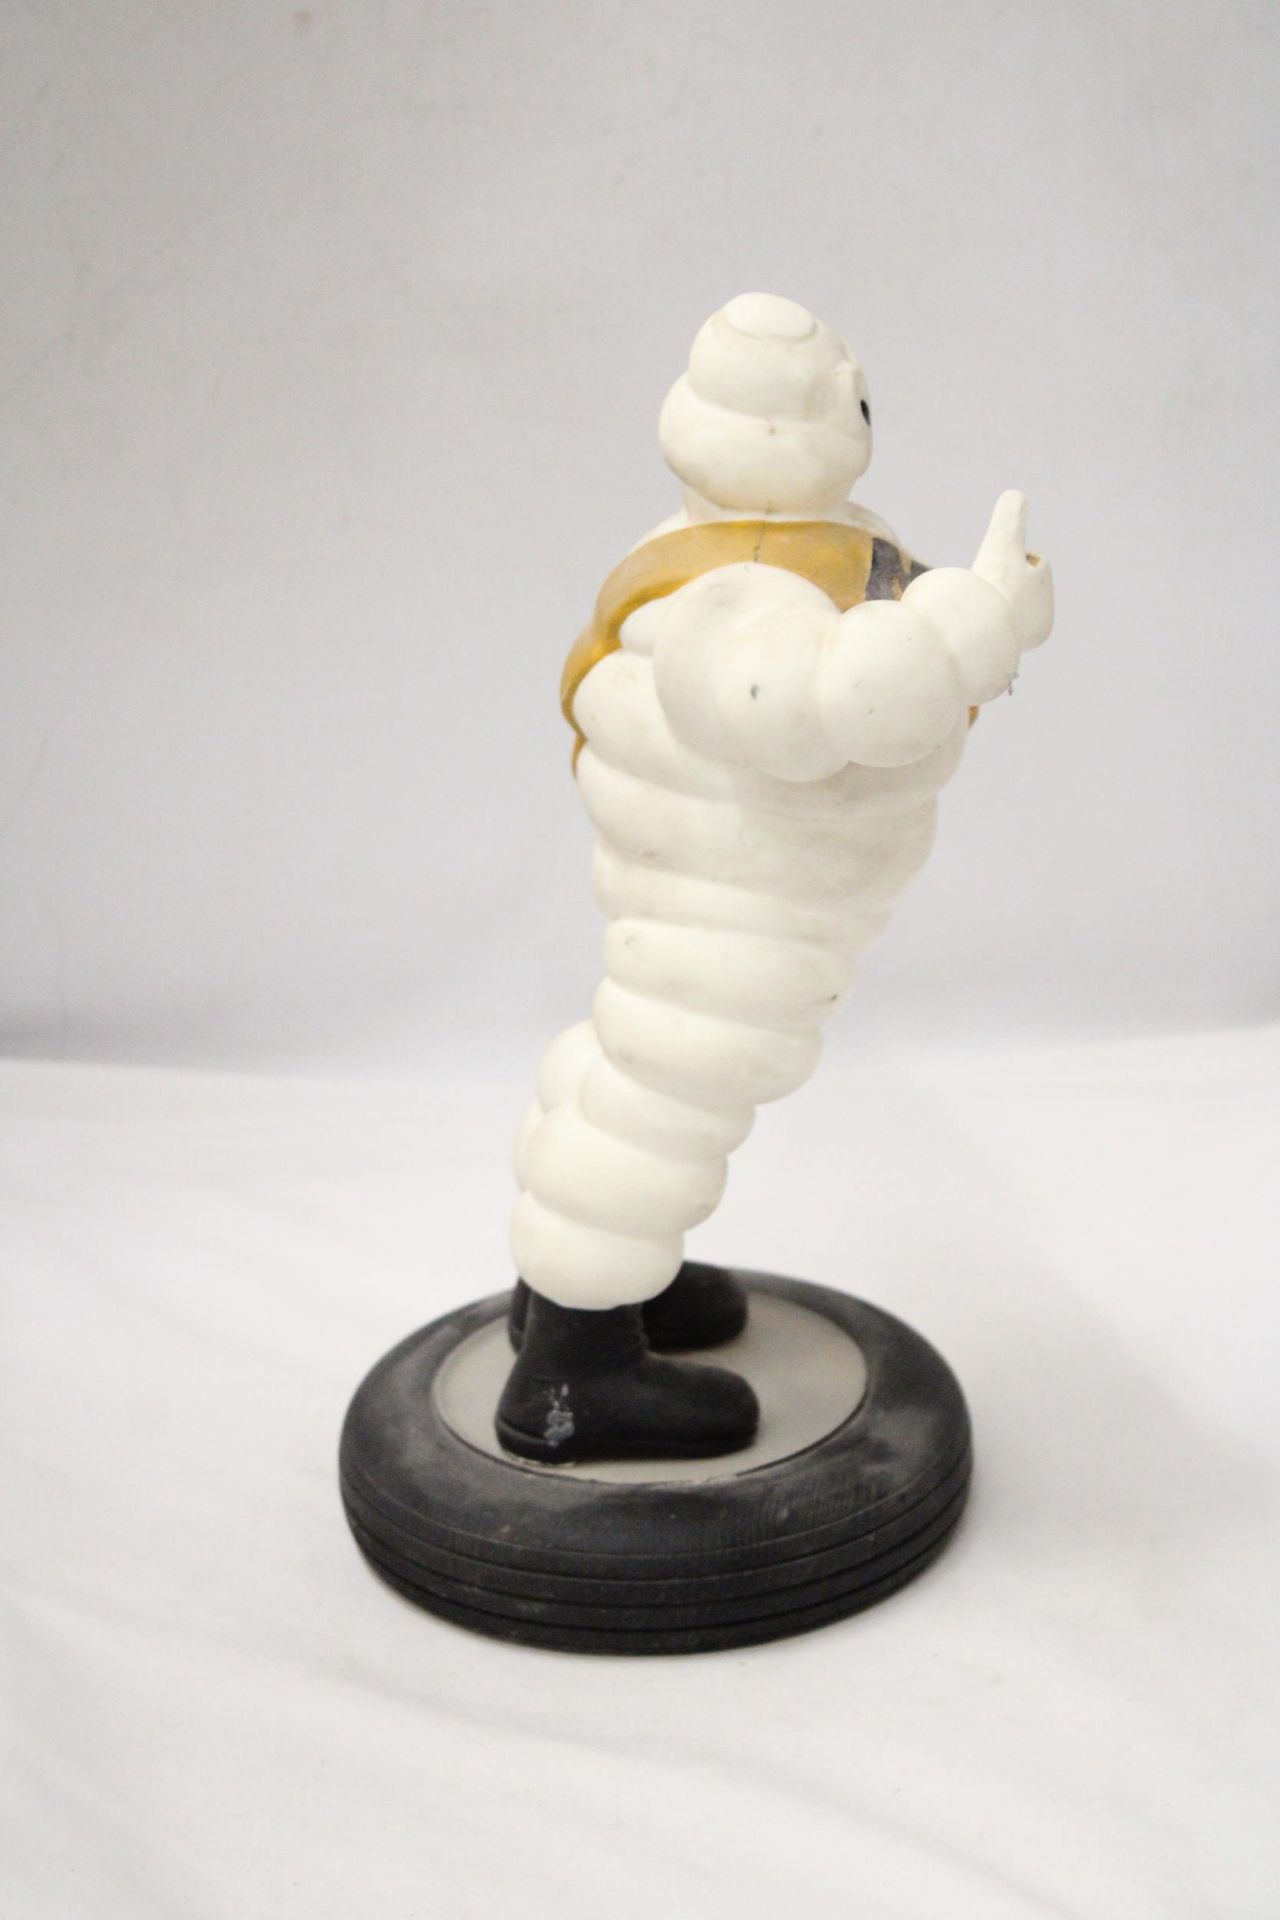 A VINTAGE MICHELIN MAN ON TYRE APPROXIMATELY 33 CM HIGH - Image 5 of 5